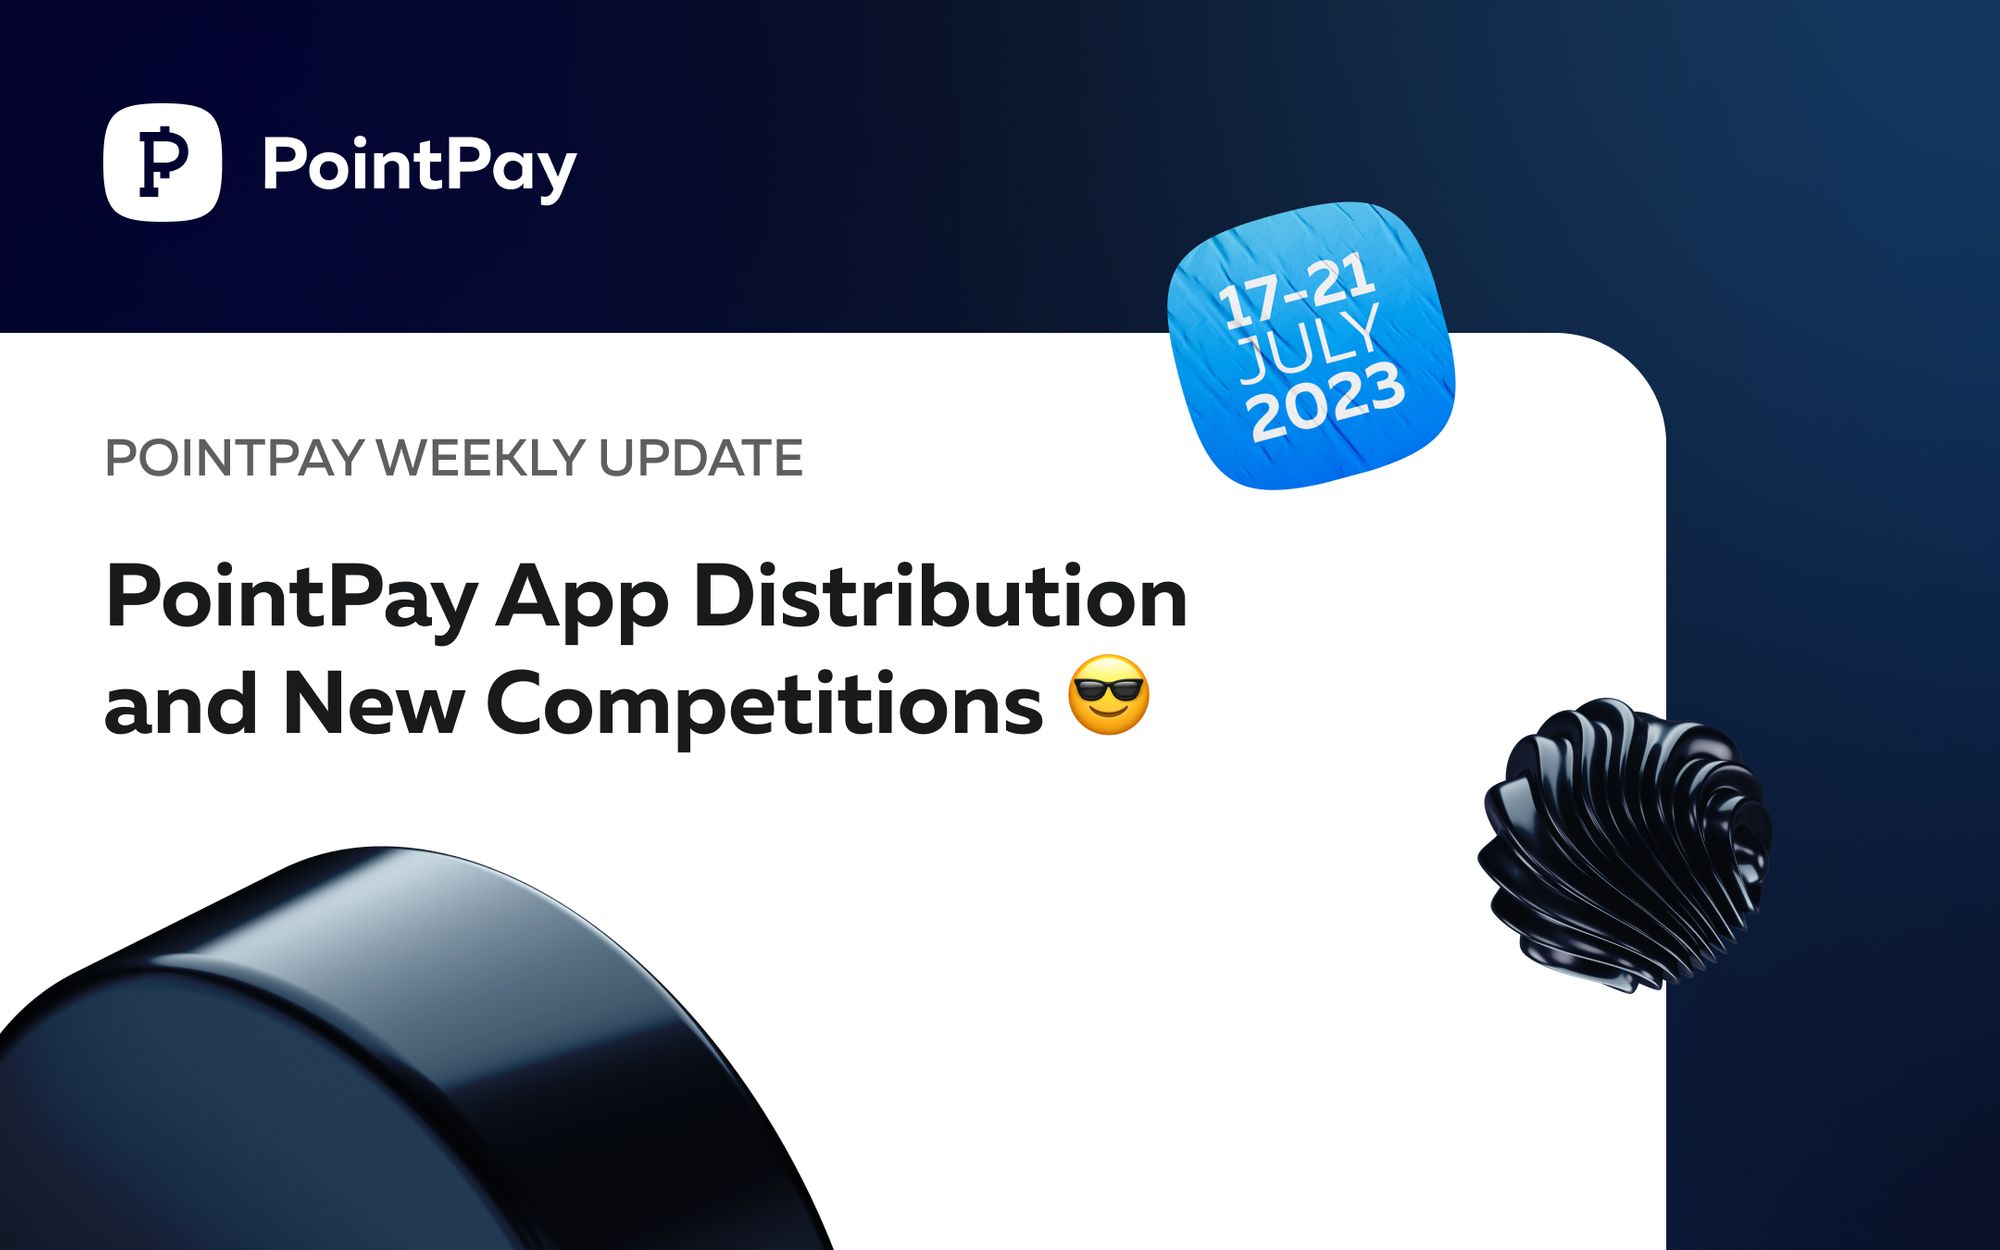 PointPay Weekly Update (17 - 21 July 2023)